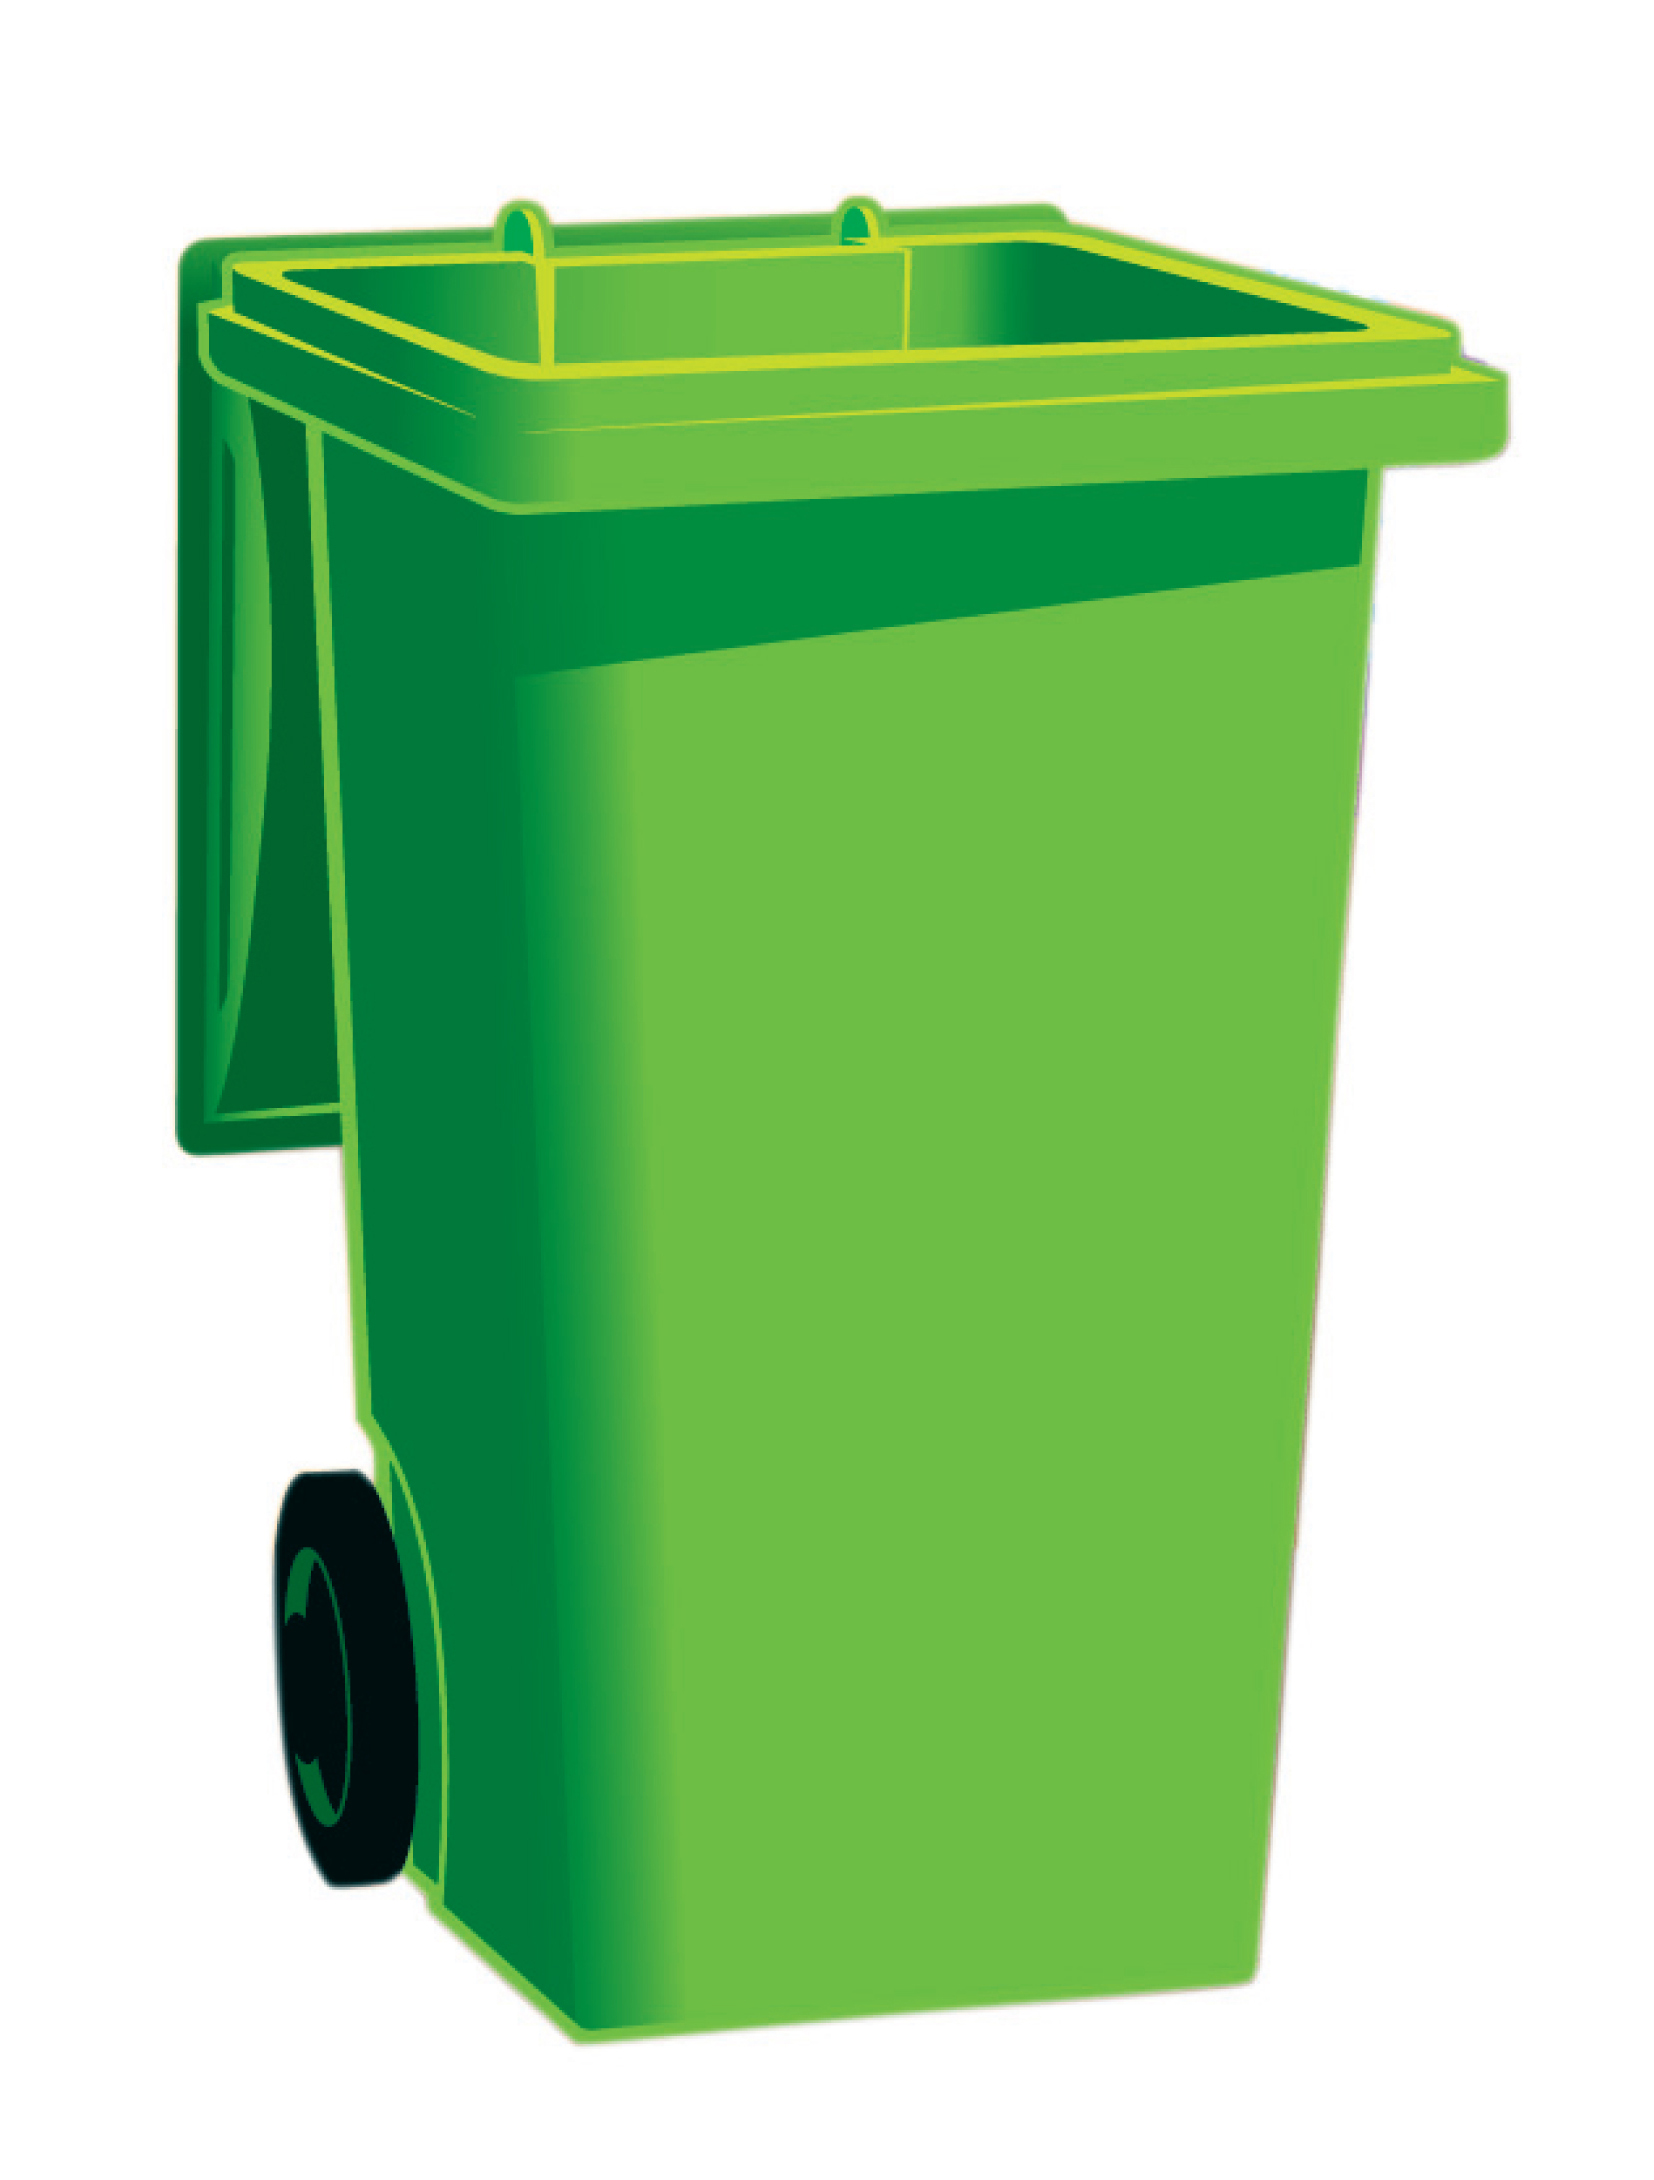 Images Of Recycling Bins | Free Download Clip Art | Free Clip Art ...